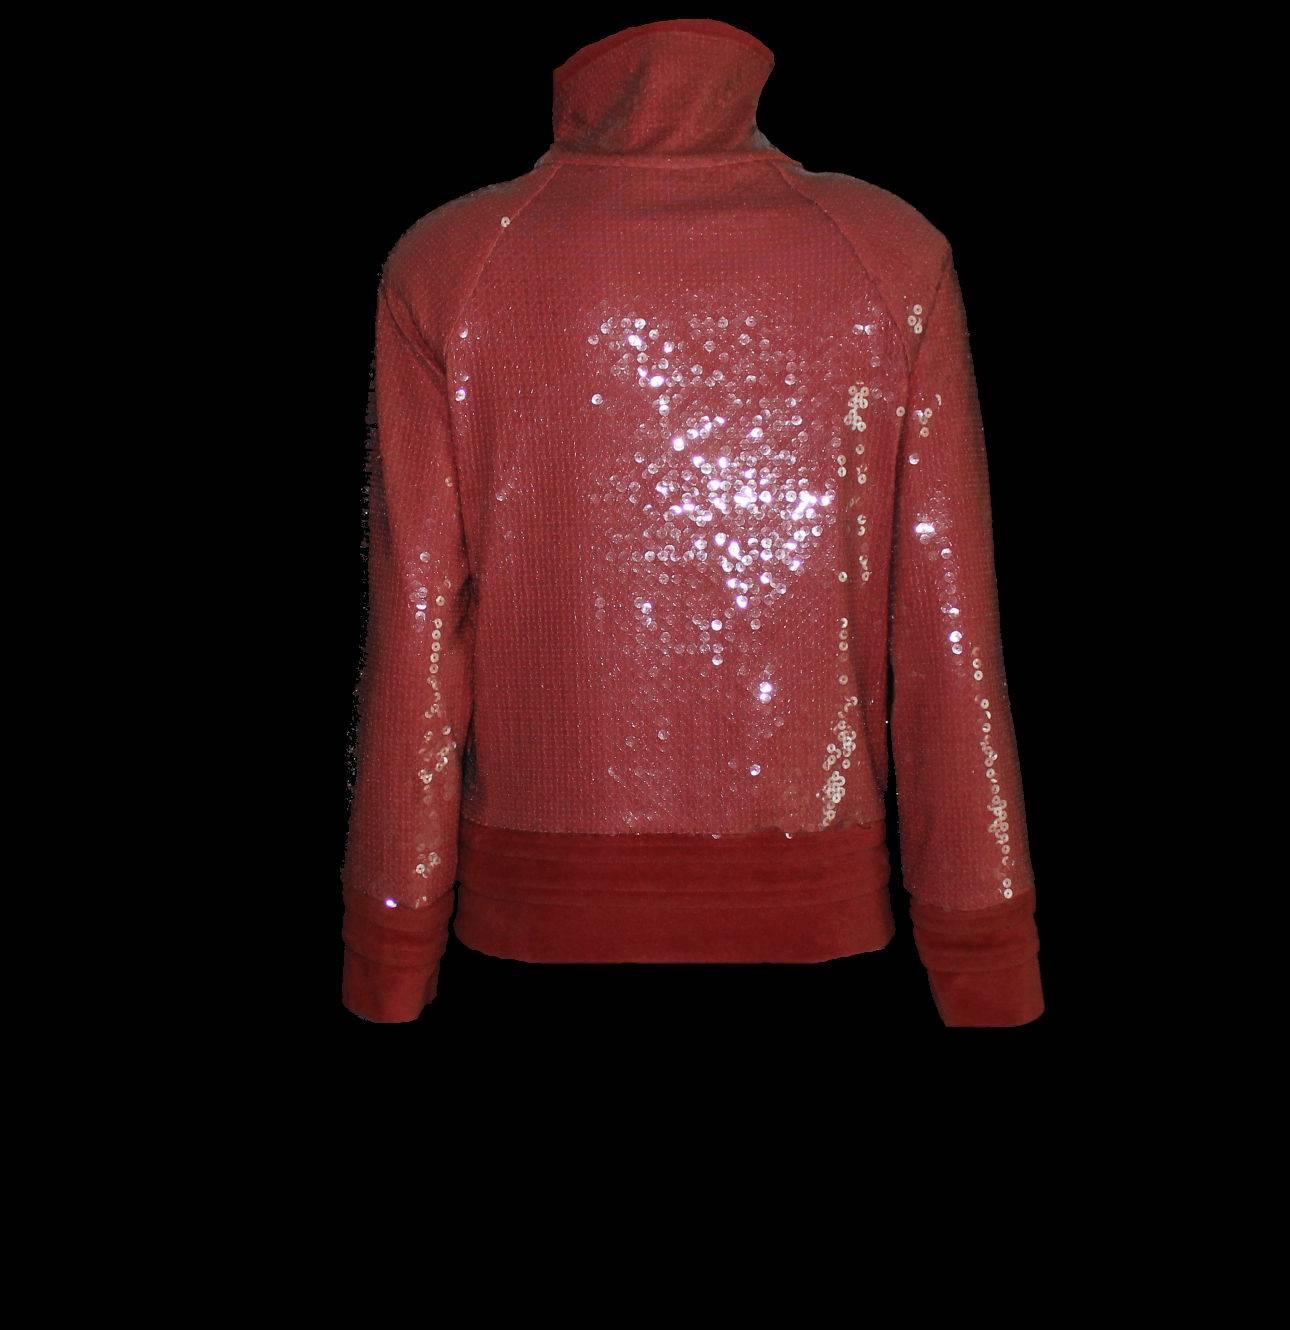 Women's NEW Chanel Coral Sequin Terrycloth Top & Jacket Twin Set Ensemble 36-38 For Sale